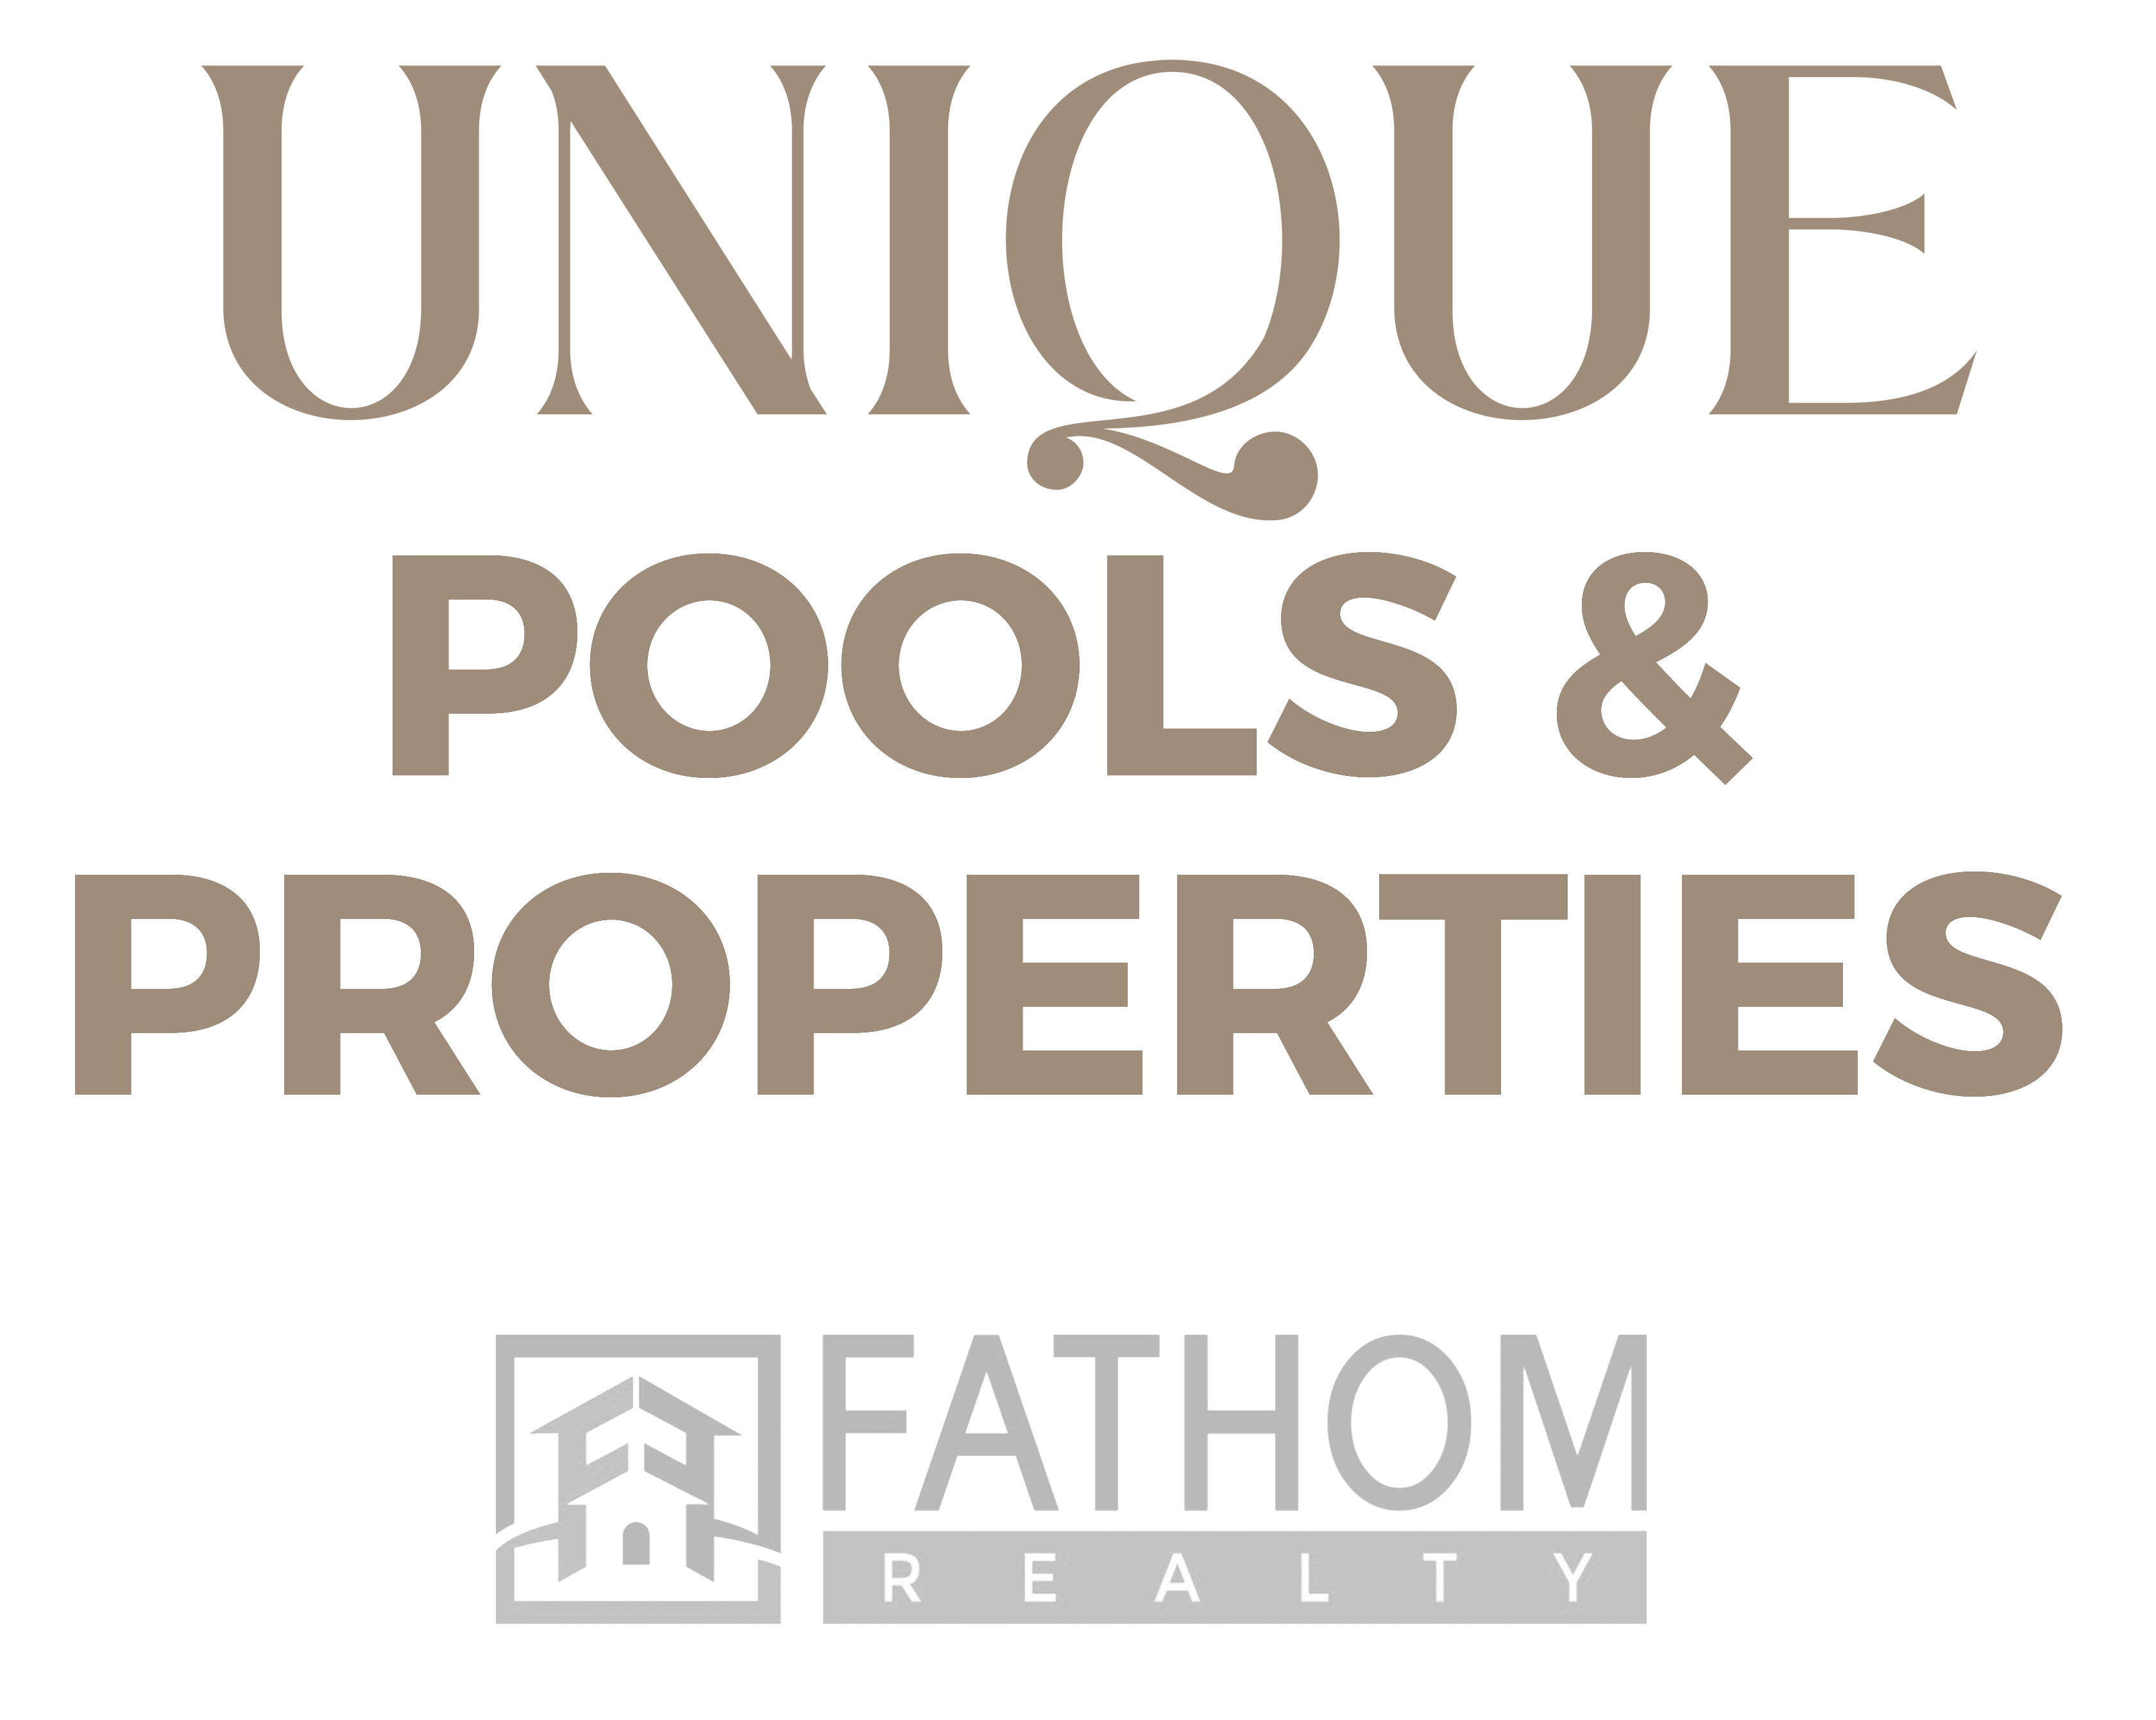 Texas Pools and Properties